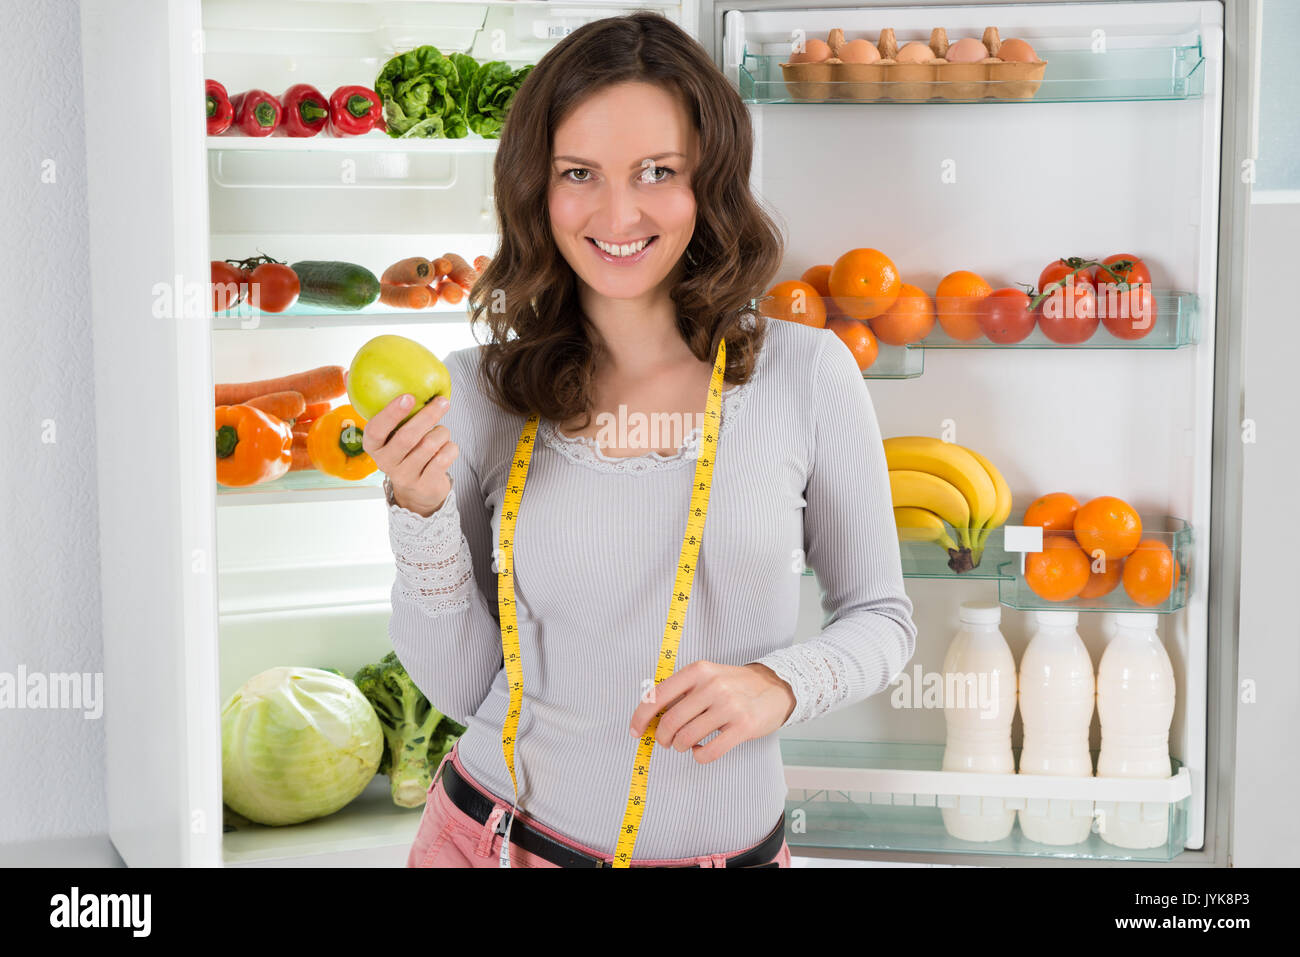 Happy Woman With Measuring Tape And Green Apple Near The Open Refrigerator With Healthy Food Stock Photo